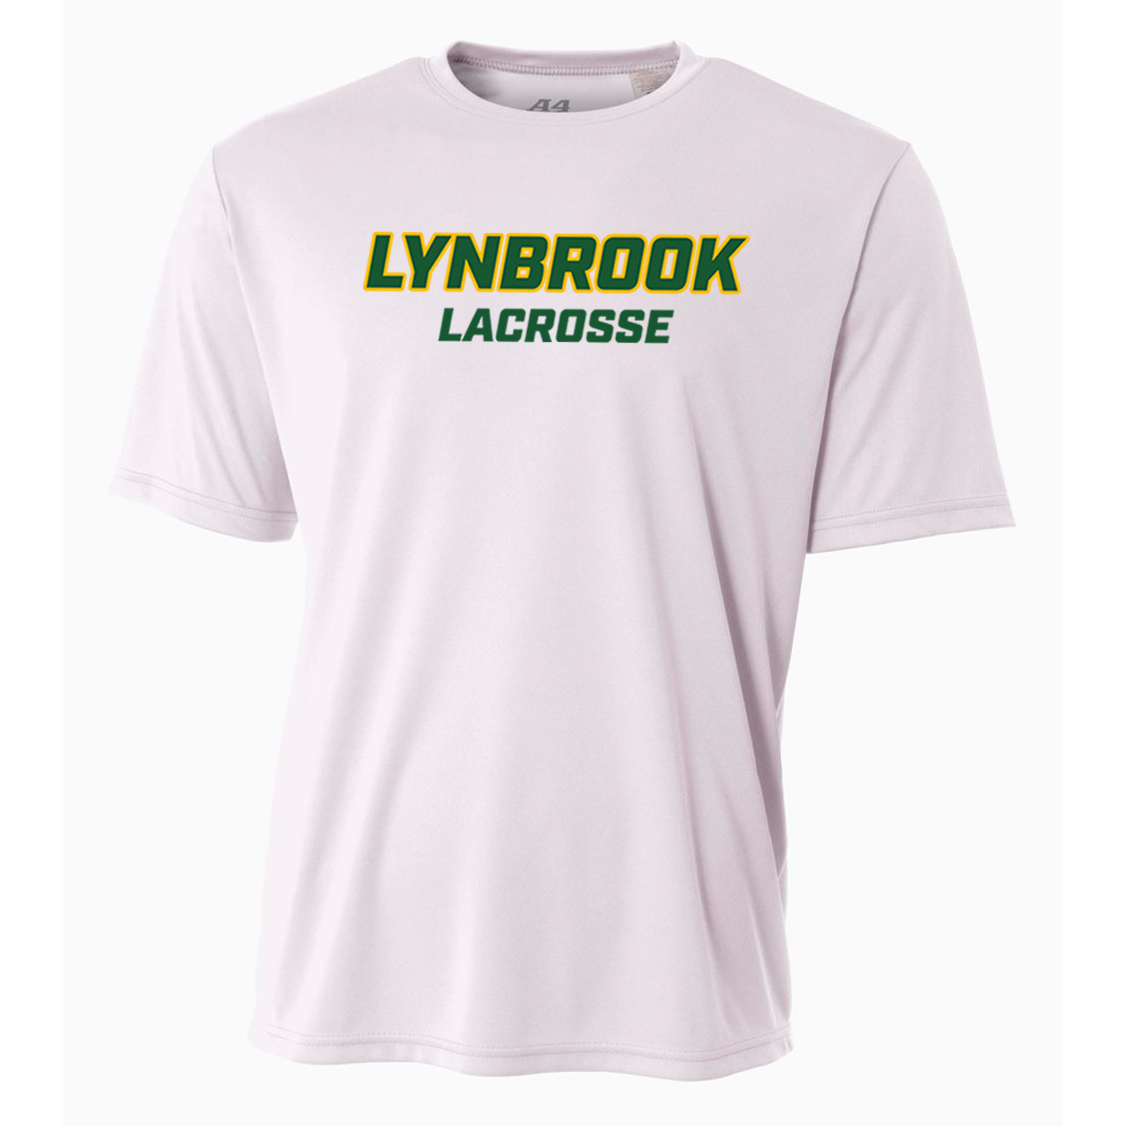 Lynbrook PAL Lacrosse A4 Cooling Performance Crew